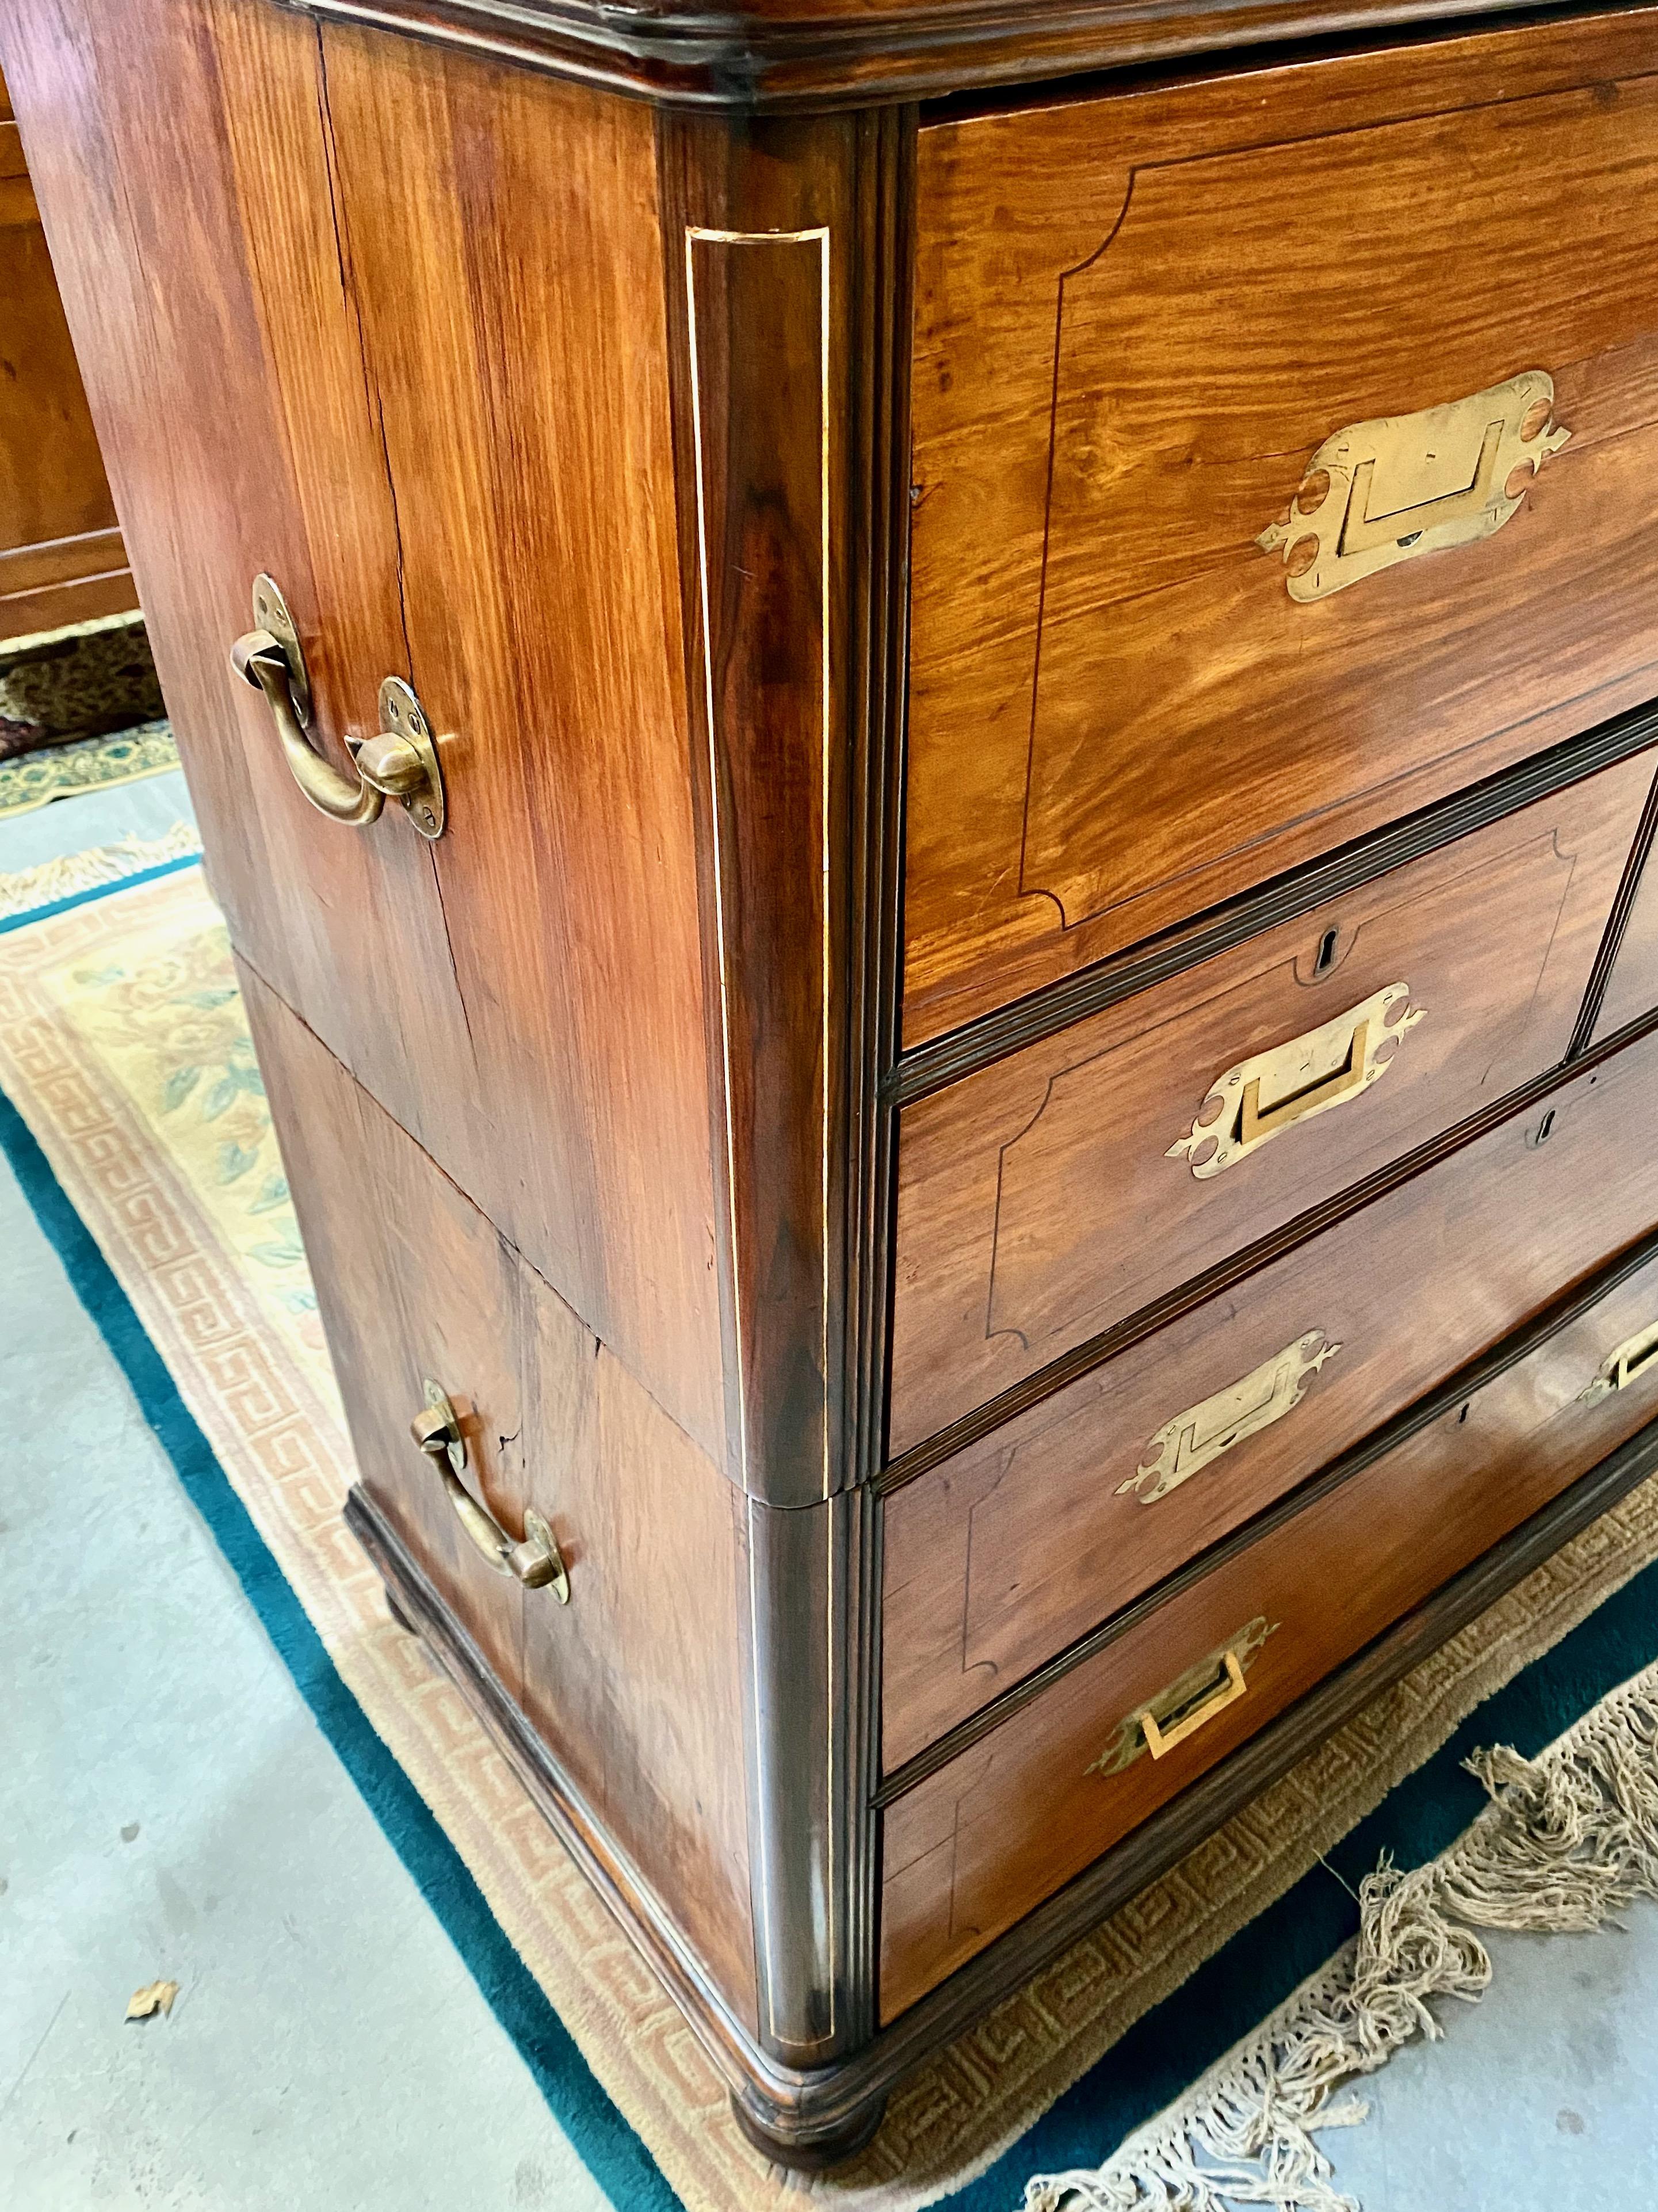 This is a unusual style of 19th century Anglo-Indian or Raj campaign chest in teak and other fine woods with detail line inlay. The two part chest is in overall very good condition. The fitted Secretaire section's arrangement of the drawers, locked